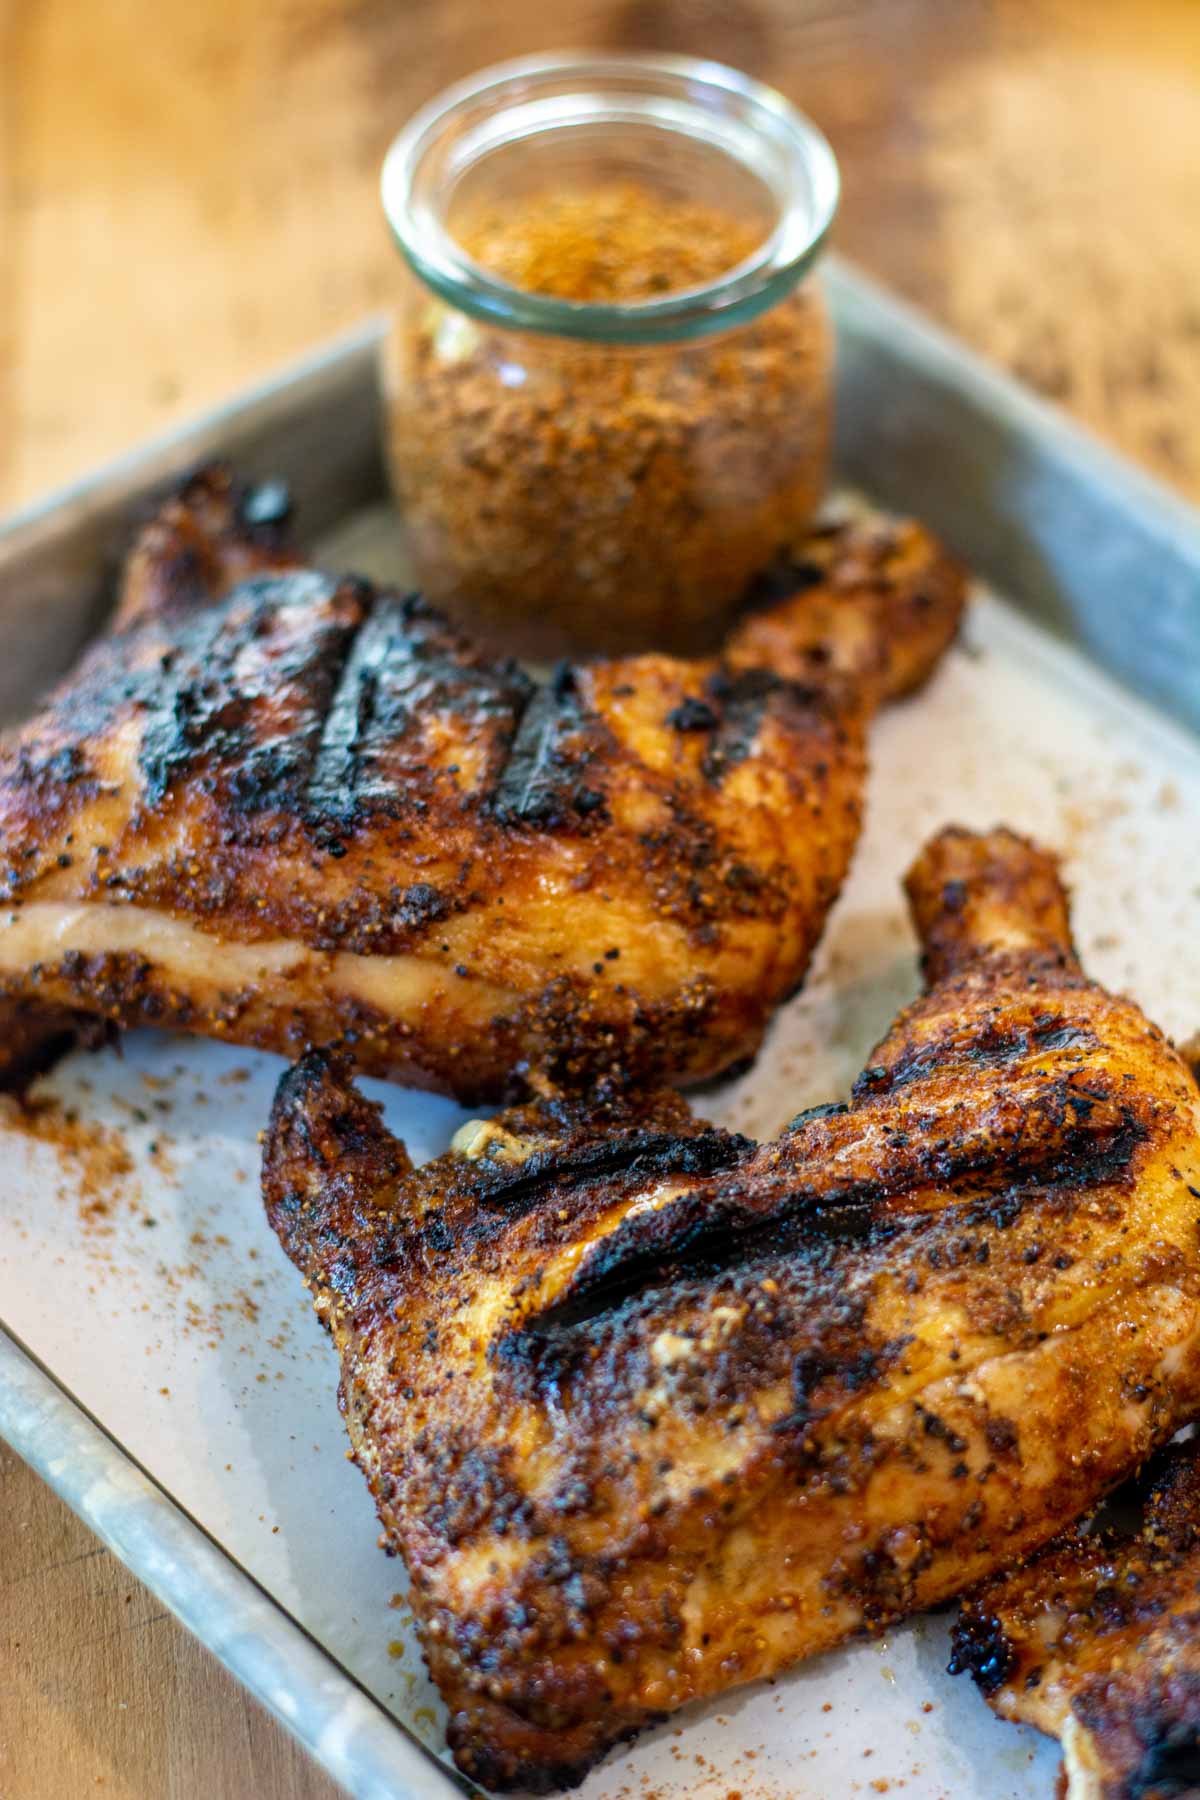 How to Make Grilled Chicken Leg Quarters